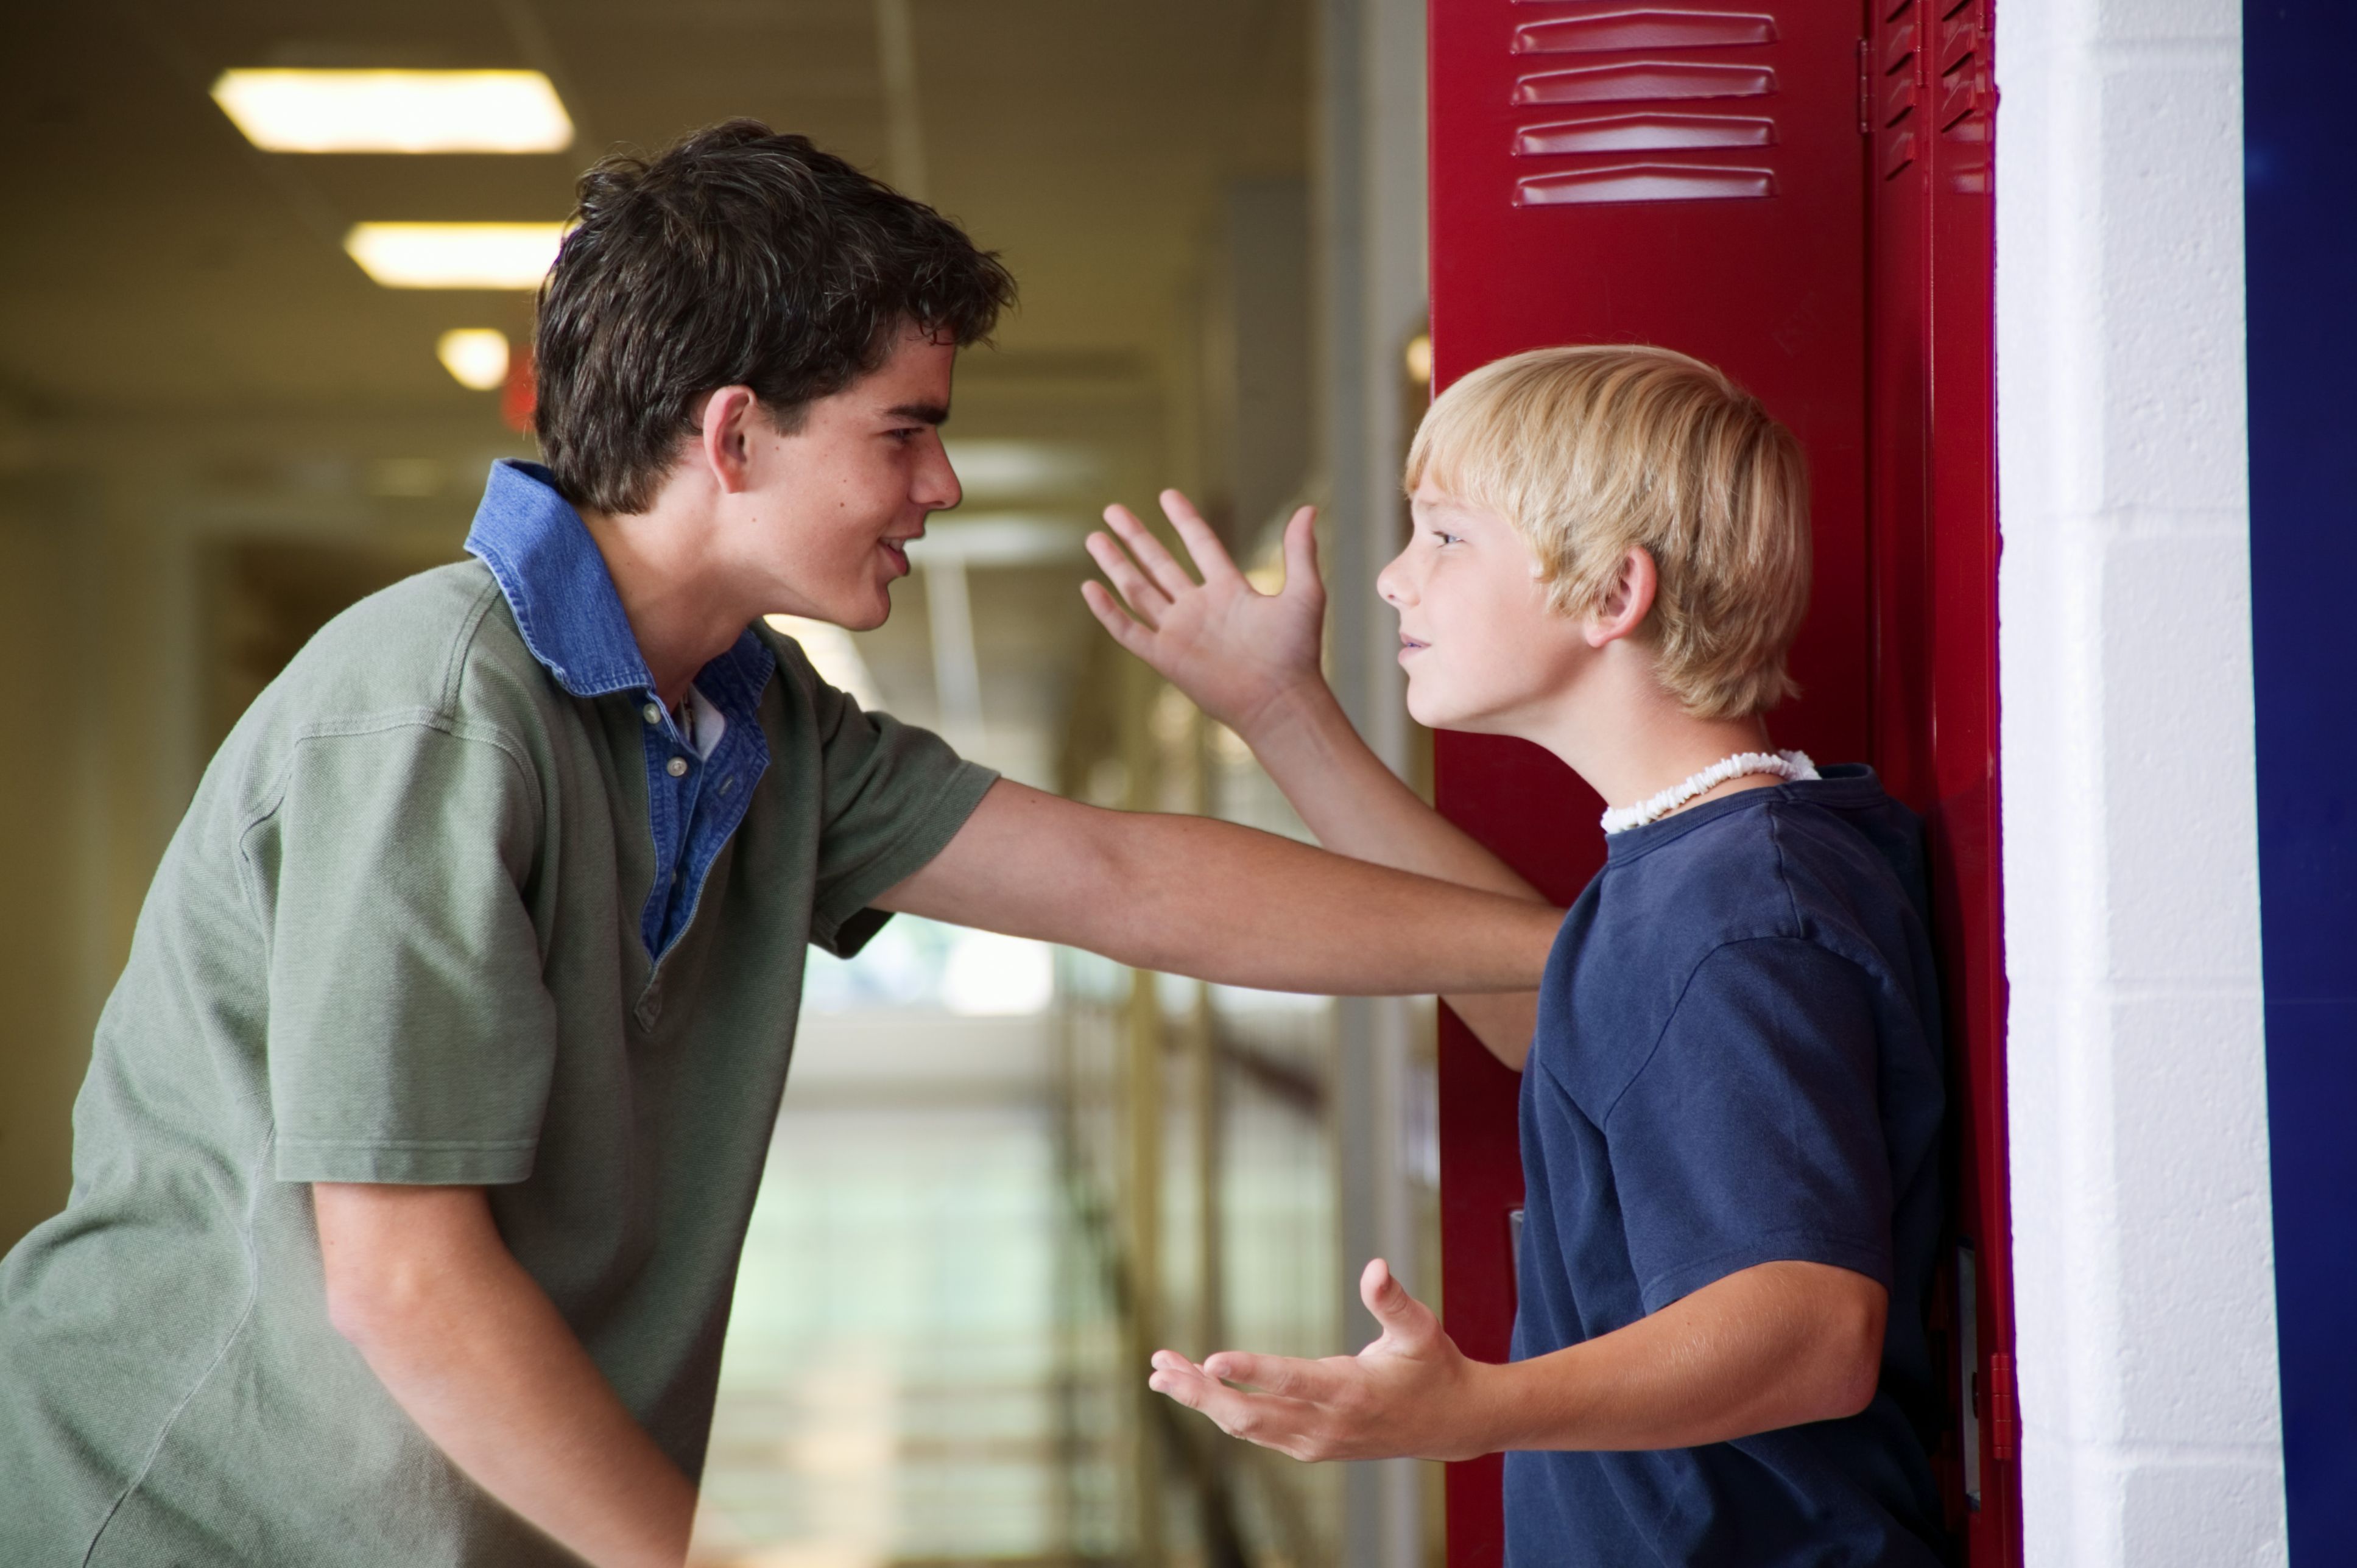 Bullying: The Cycle of the Bullied and the Bully